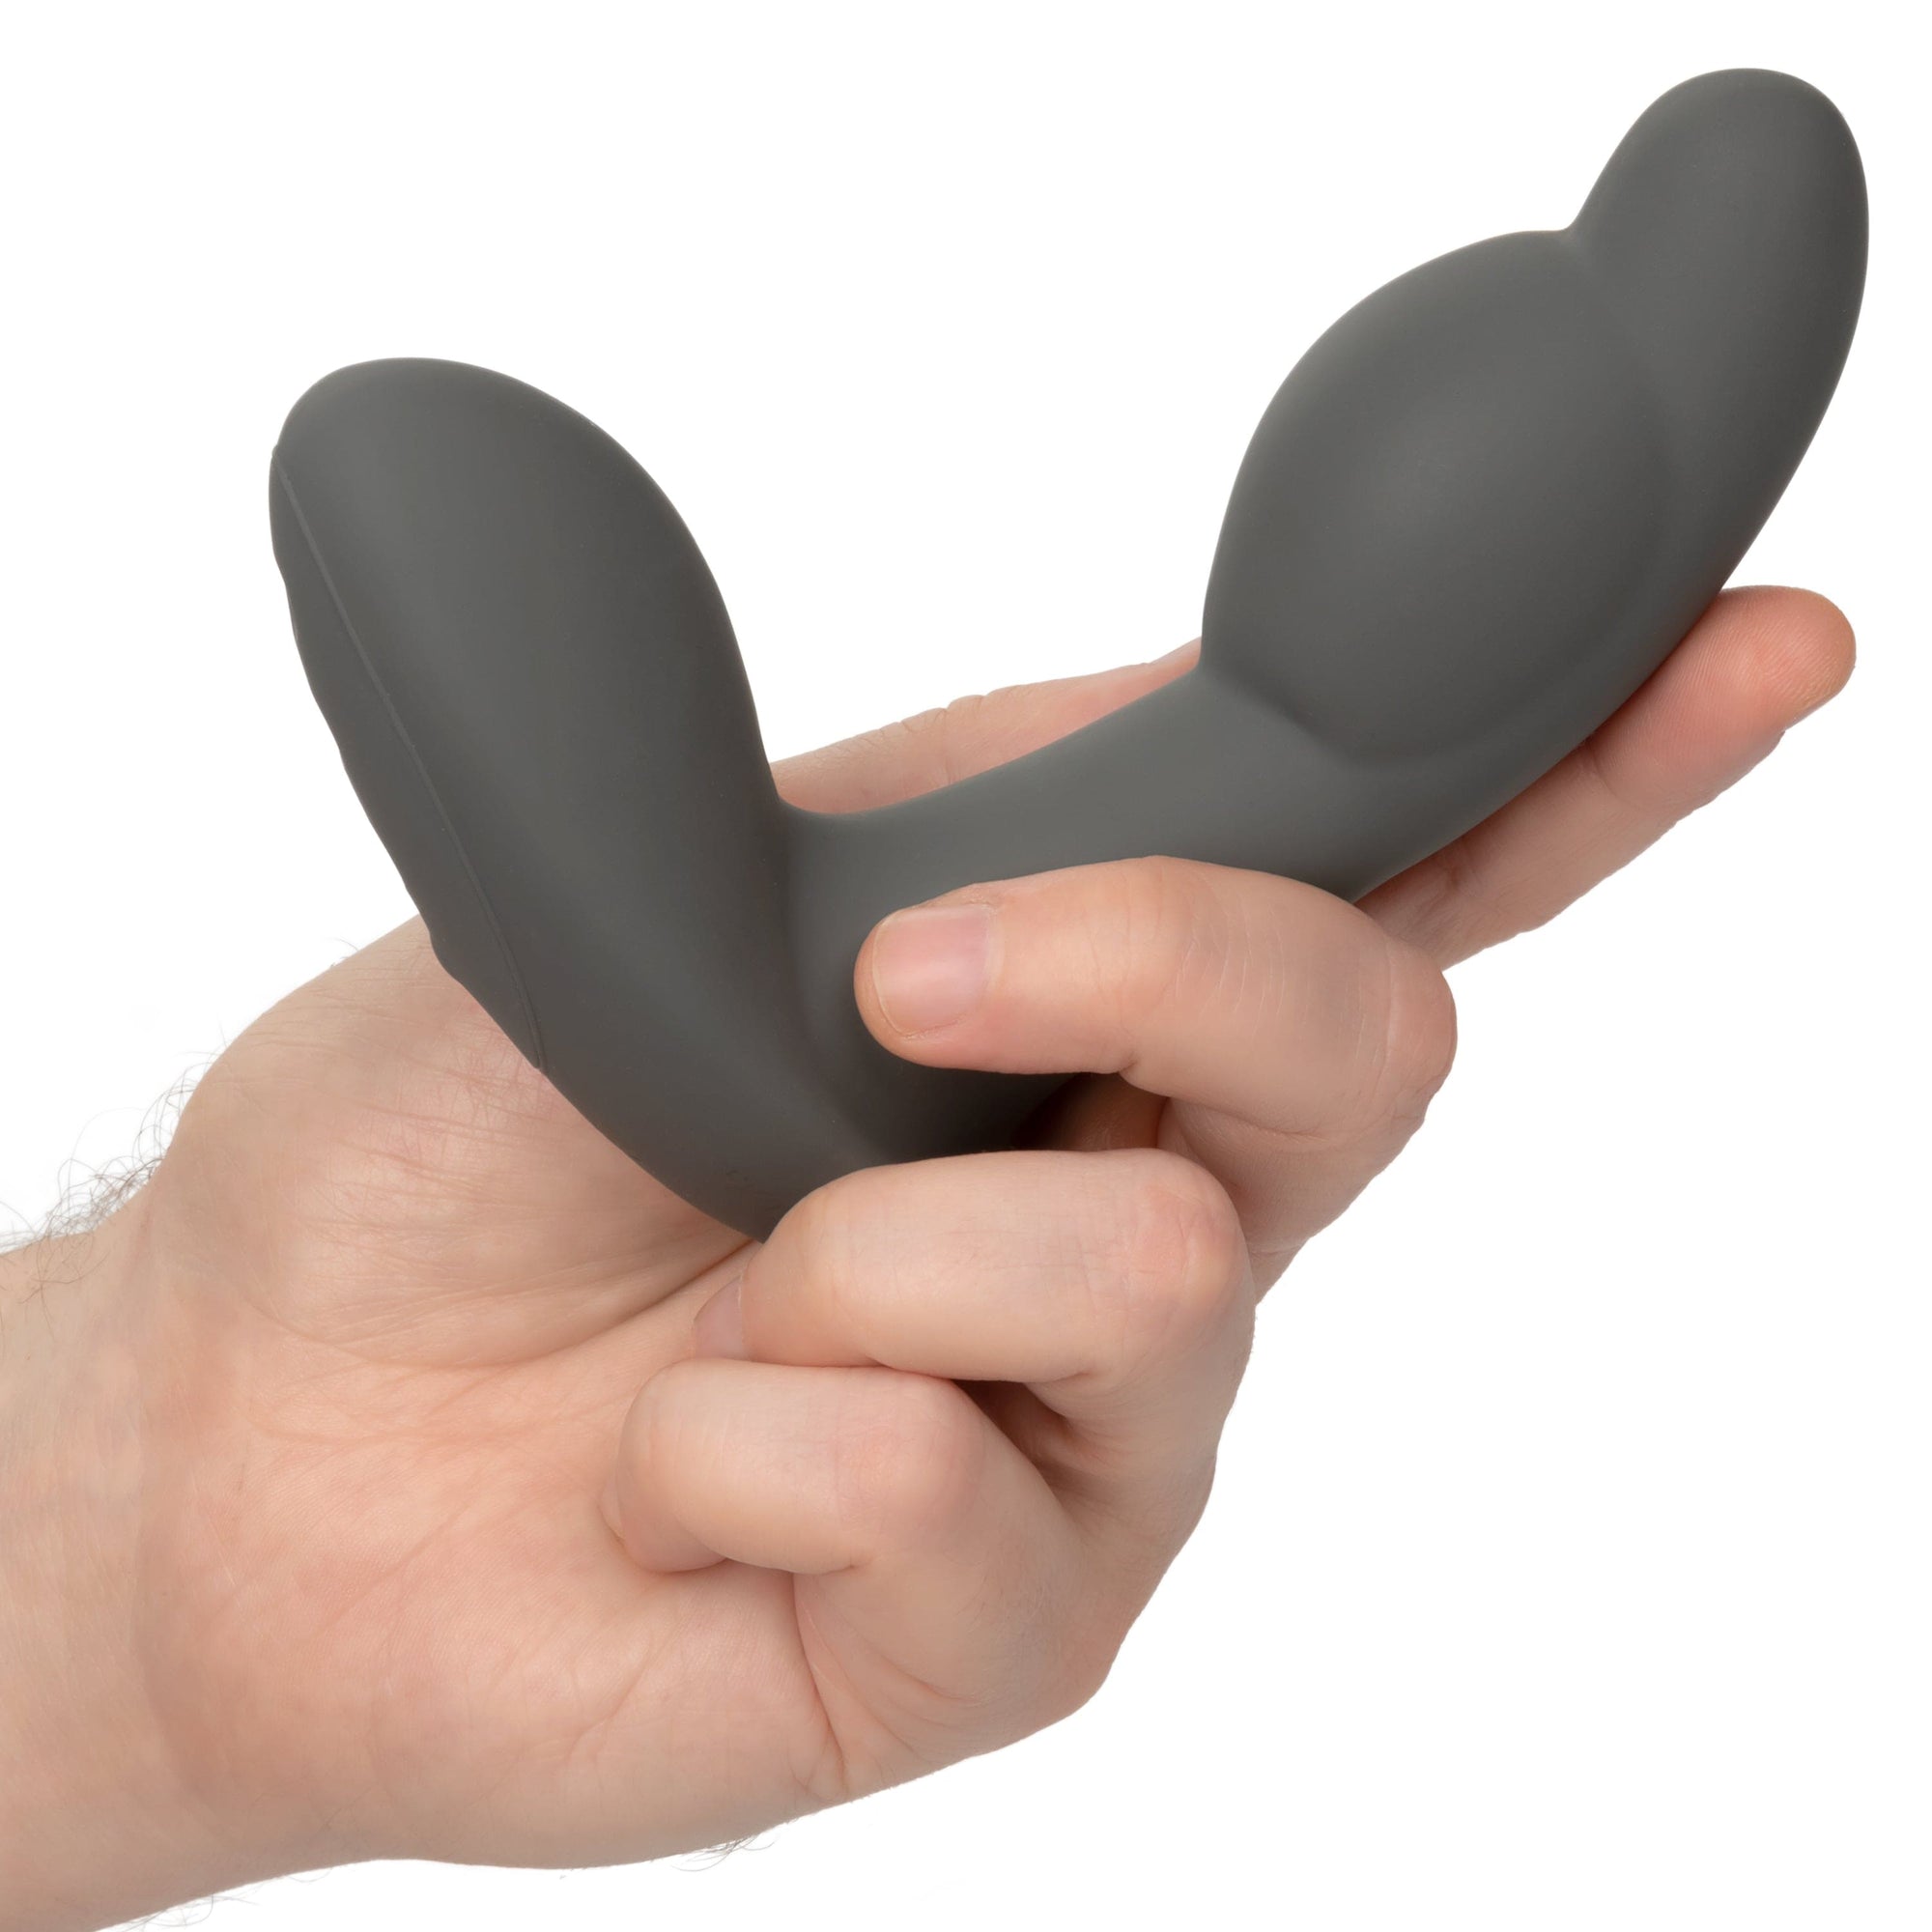 California Exotics - Eclipse Remote Control Inflatable Probe Prostate Massager (Black) -  Prostate Massager (Vibration) Rechargeable  Durio.sg